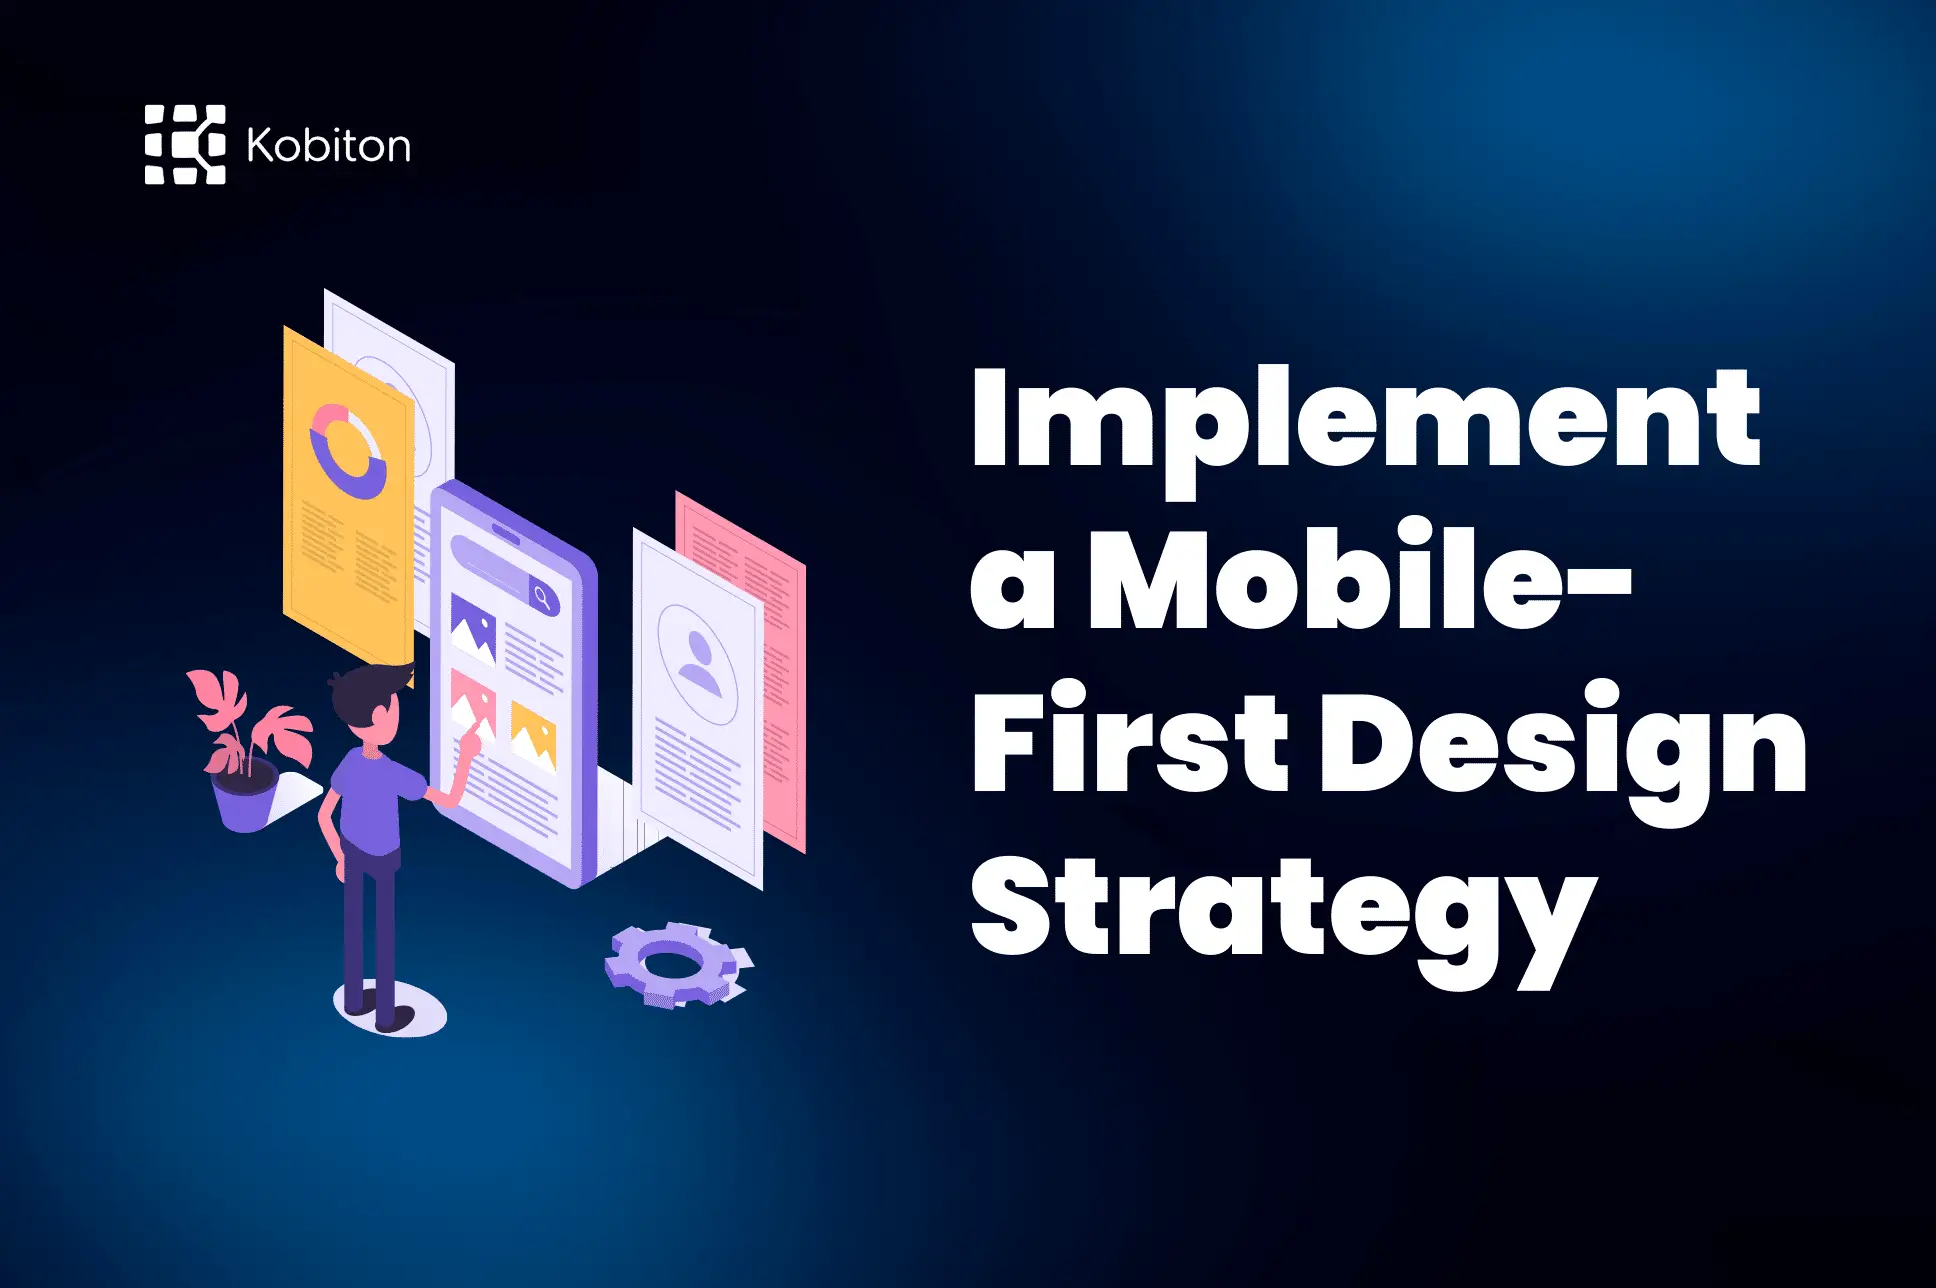 Featured image of an illustration showing a person pointing at a large mobile screen. "Implement-a-Mobile-First-Design-Strategy"